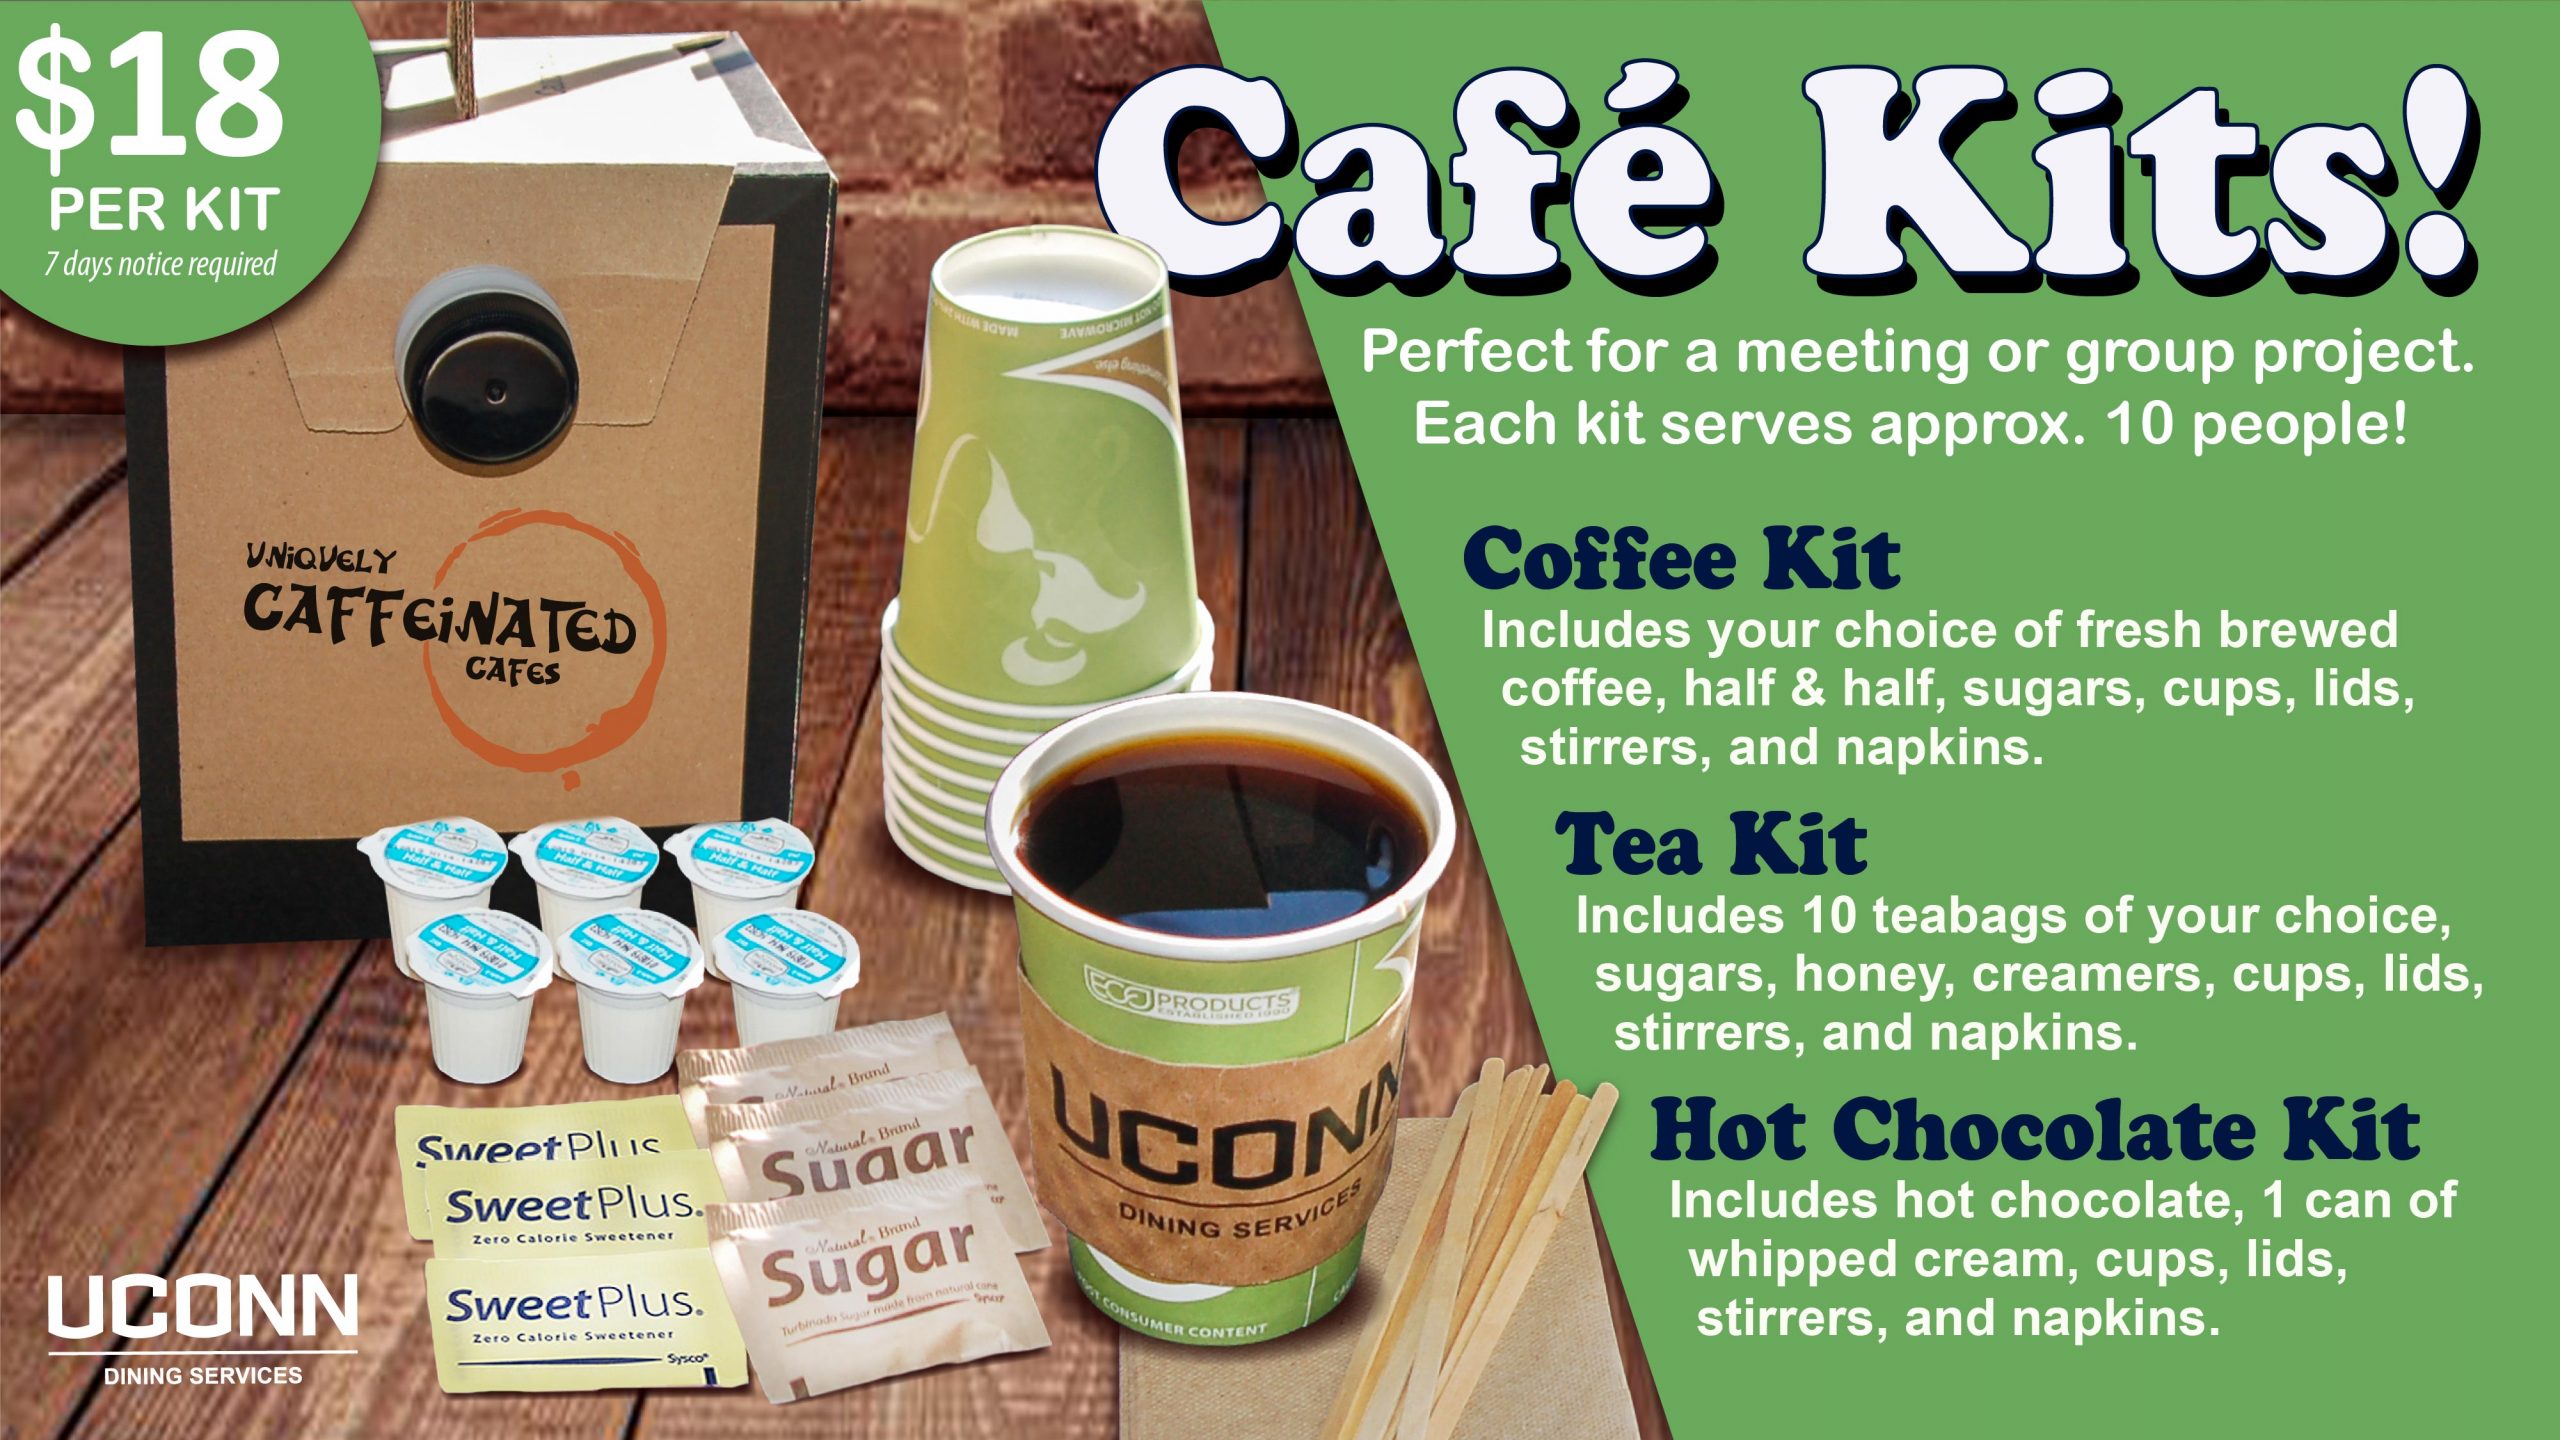 Order a cafe kit for your next meeting. Options include coffee kit, tea kit, or hot chocolate kit with all the necessary items. Each kit serves approximately 10 people. Please provide 7 days notice for ordering a Cafe Kit. Click on the image above and select Cafe Kit from the list to contact us about placing an order.